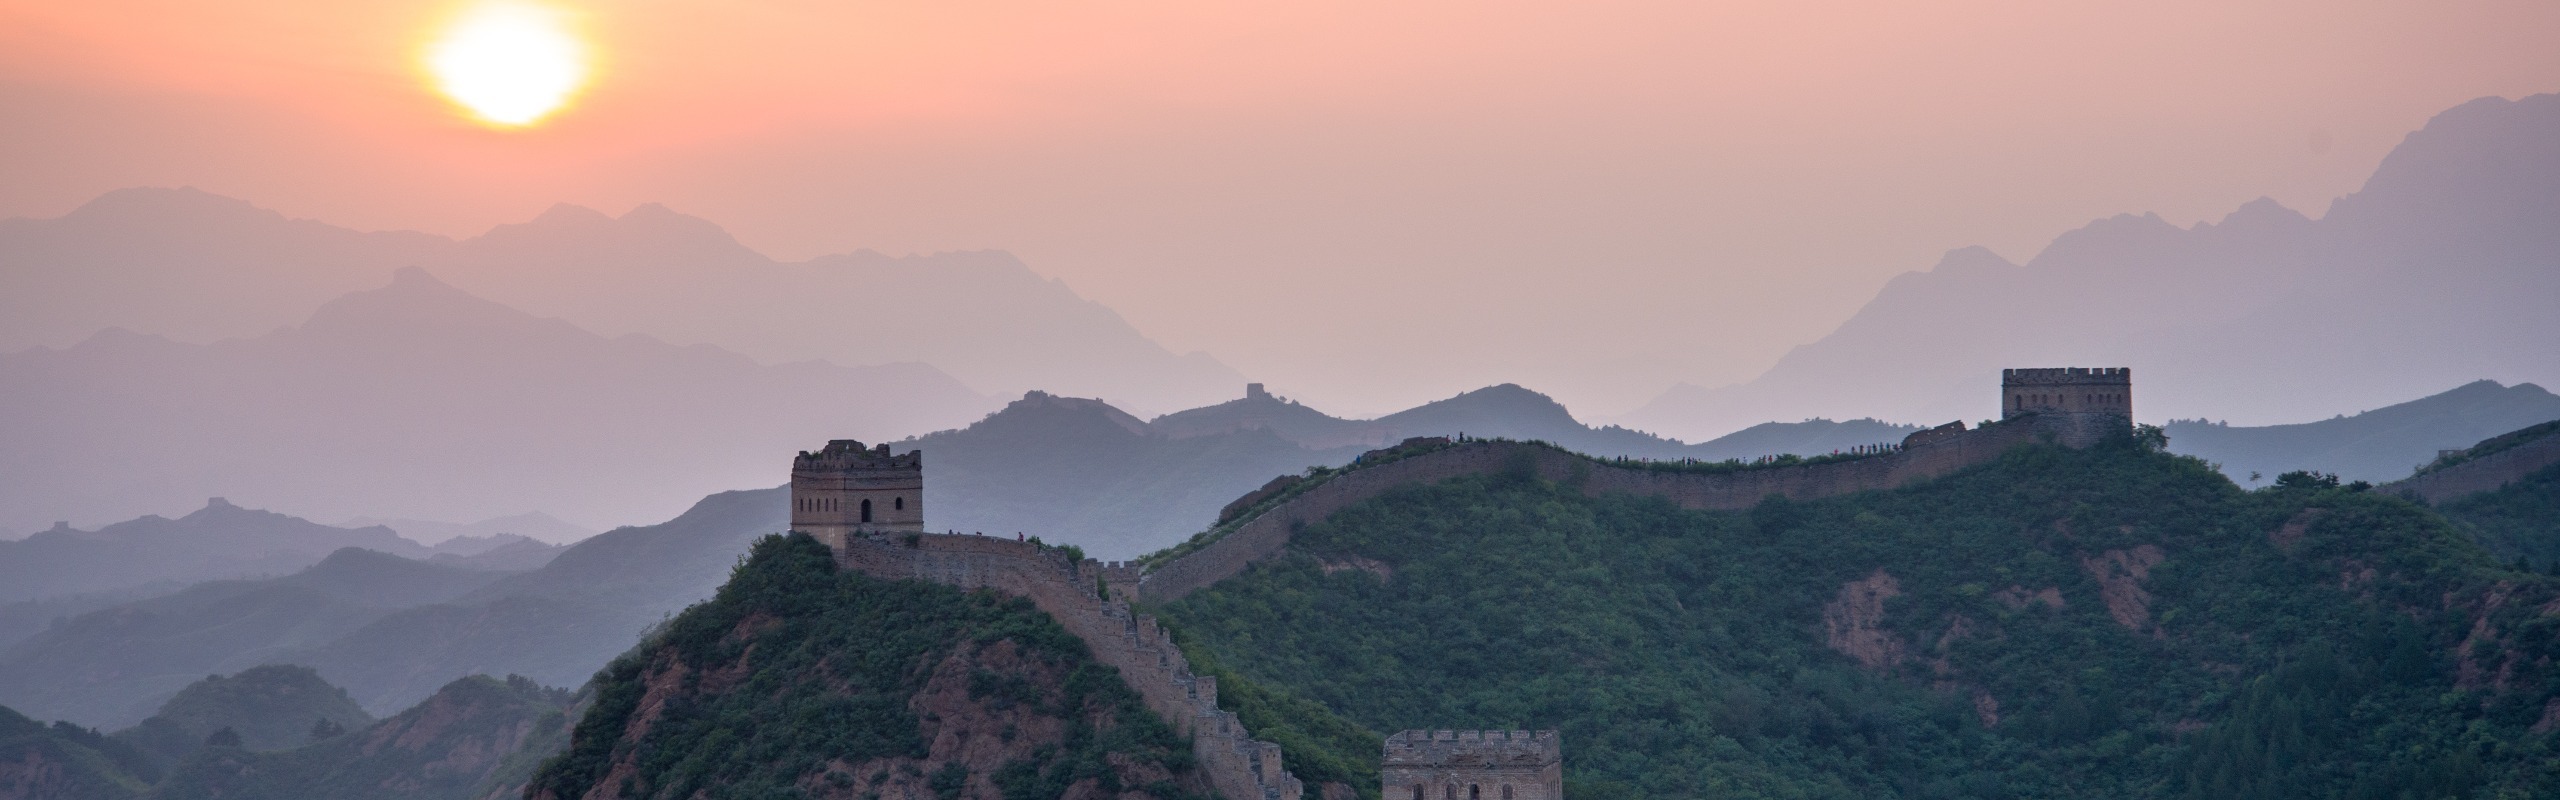 12-Day Beijing, Xi'an, Guilin, Shanghai Tour for Your Summer Vacation